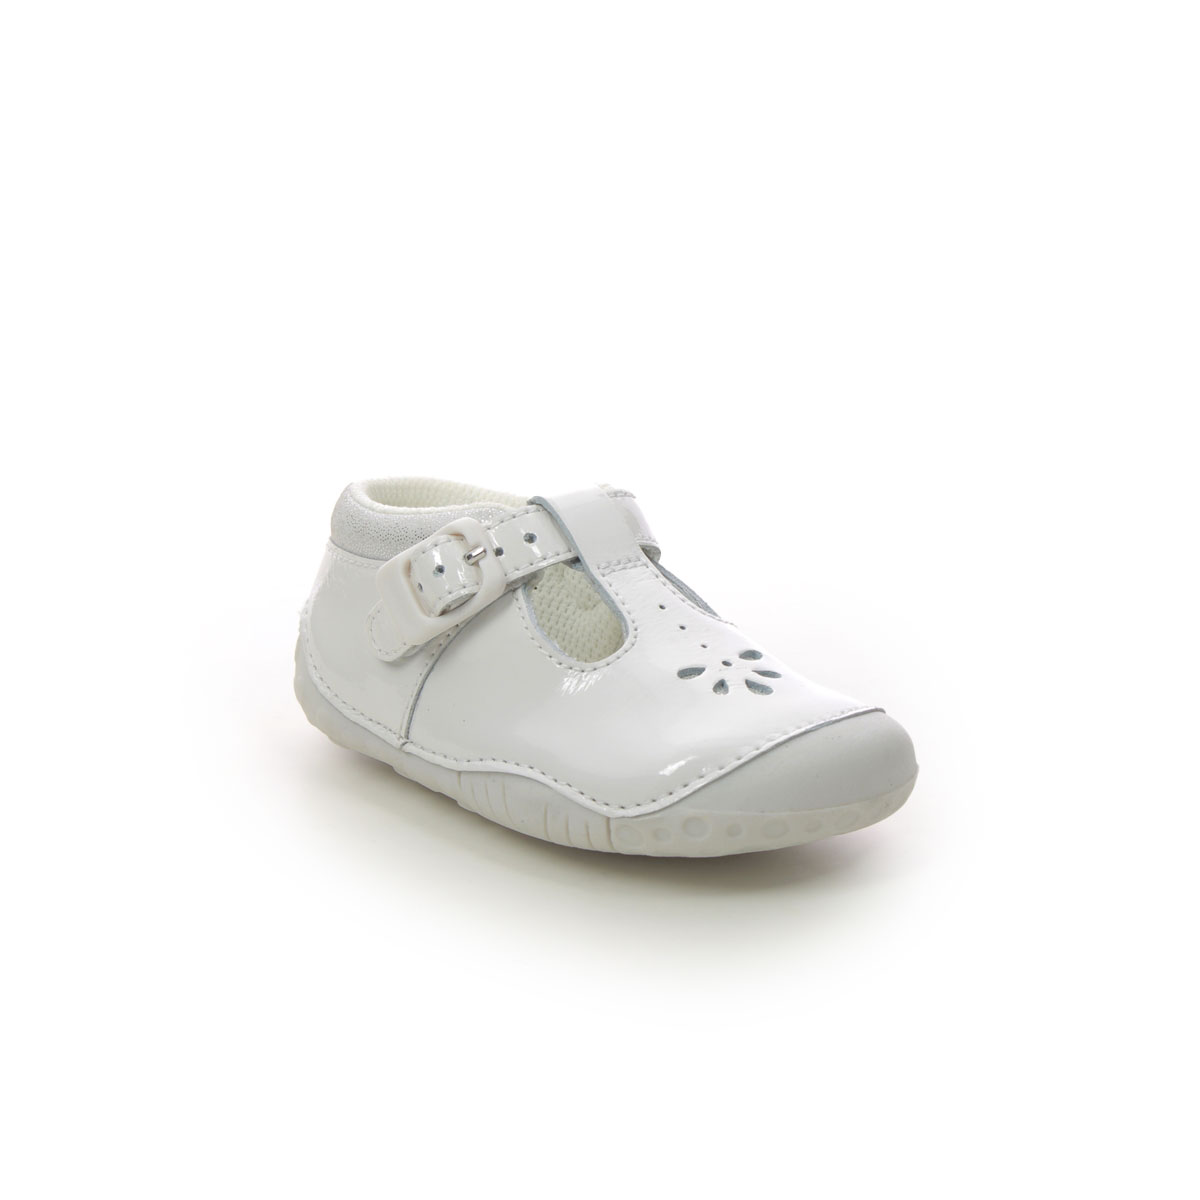 Start Rite - Baby Bubble In White Patent 0773-14G In Size 2.5 In Plain White Patent First And Baby Shoes  In White Patent For kids